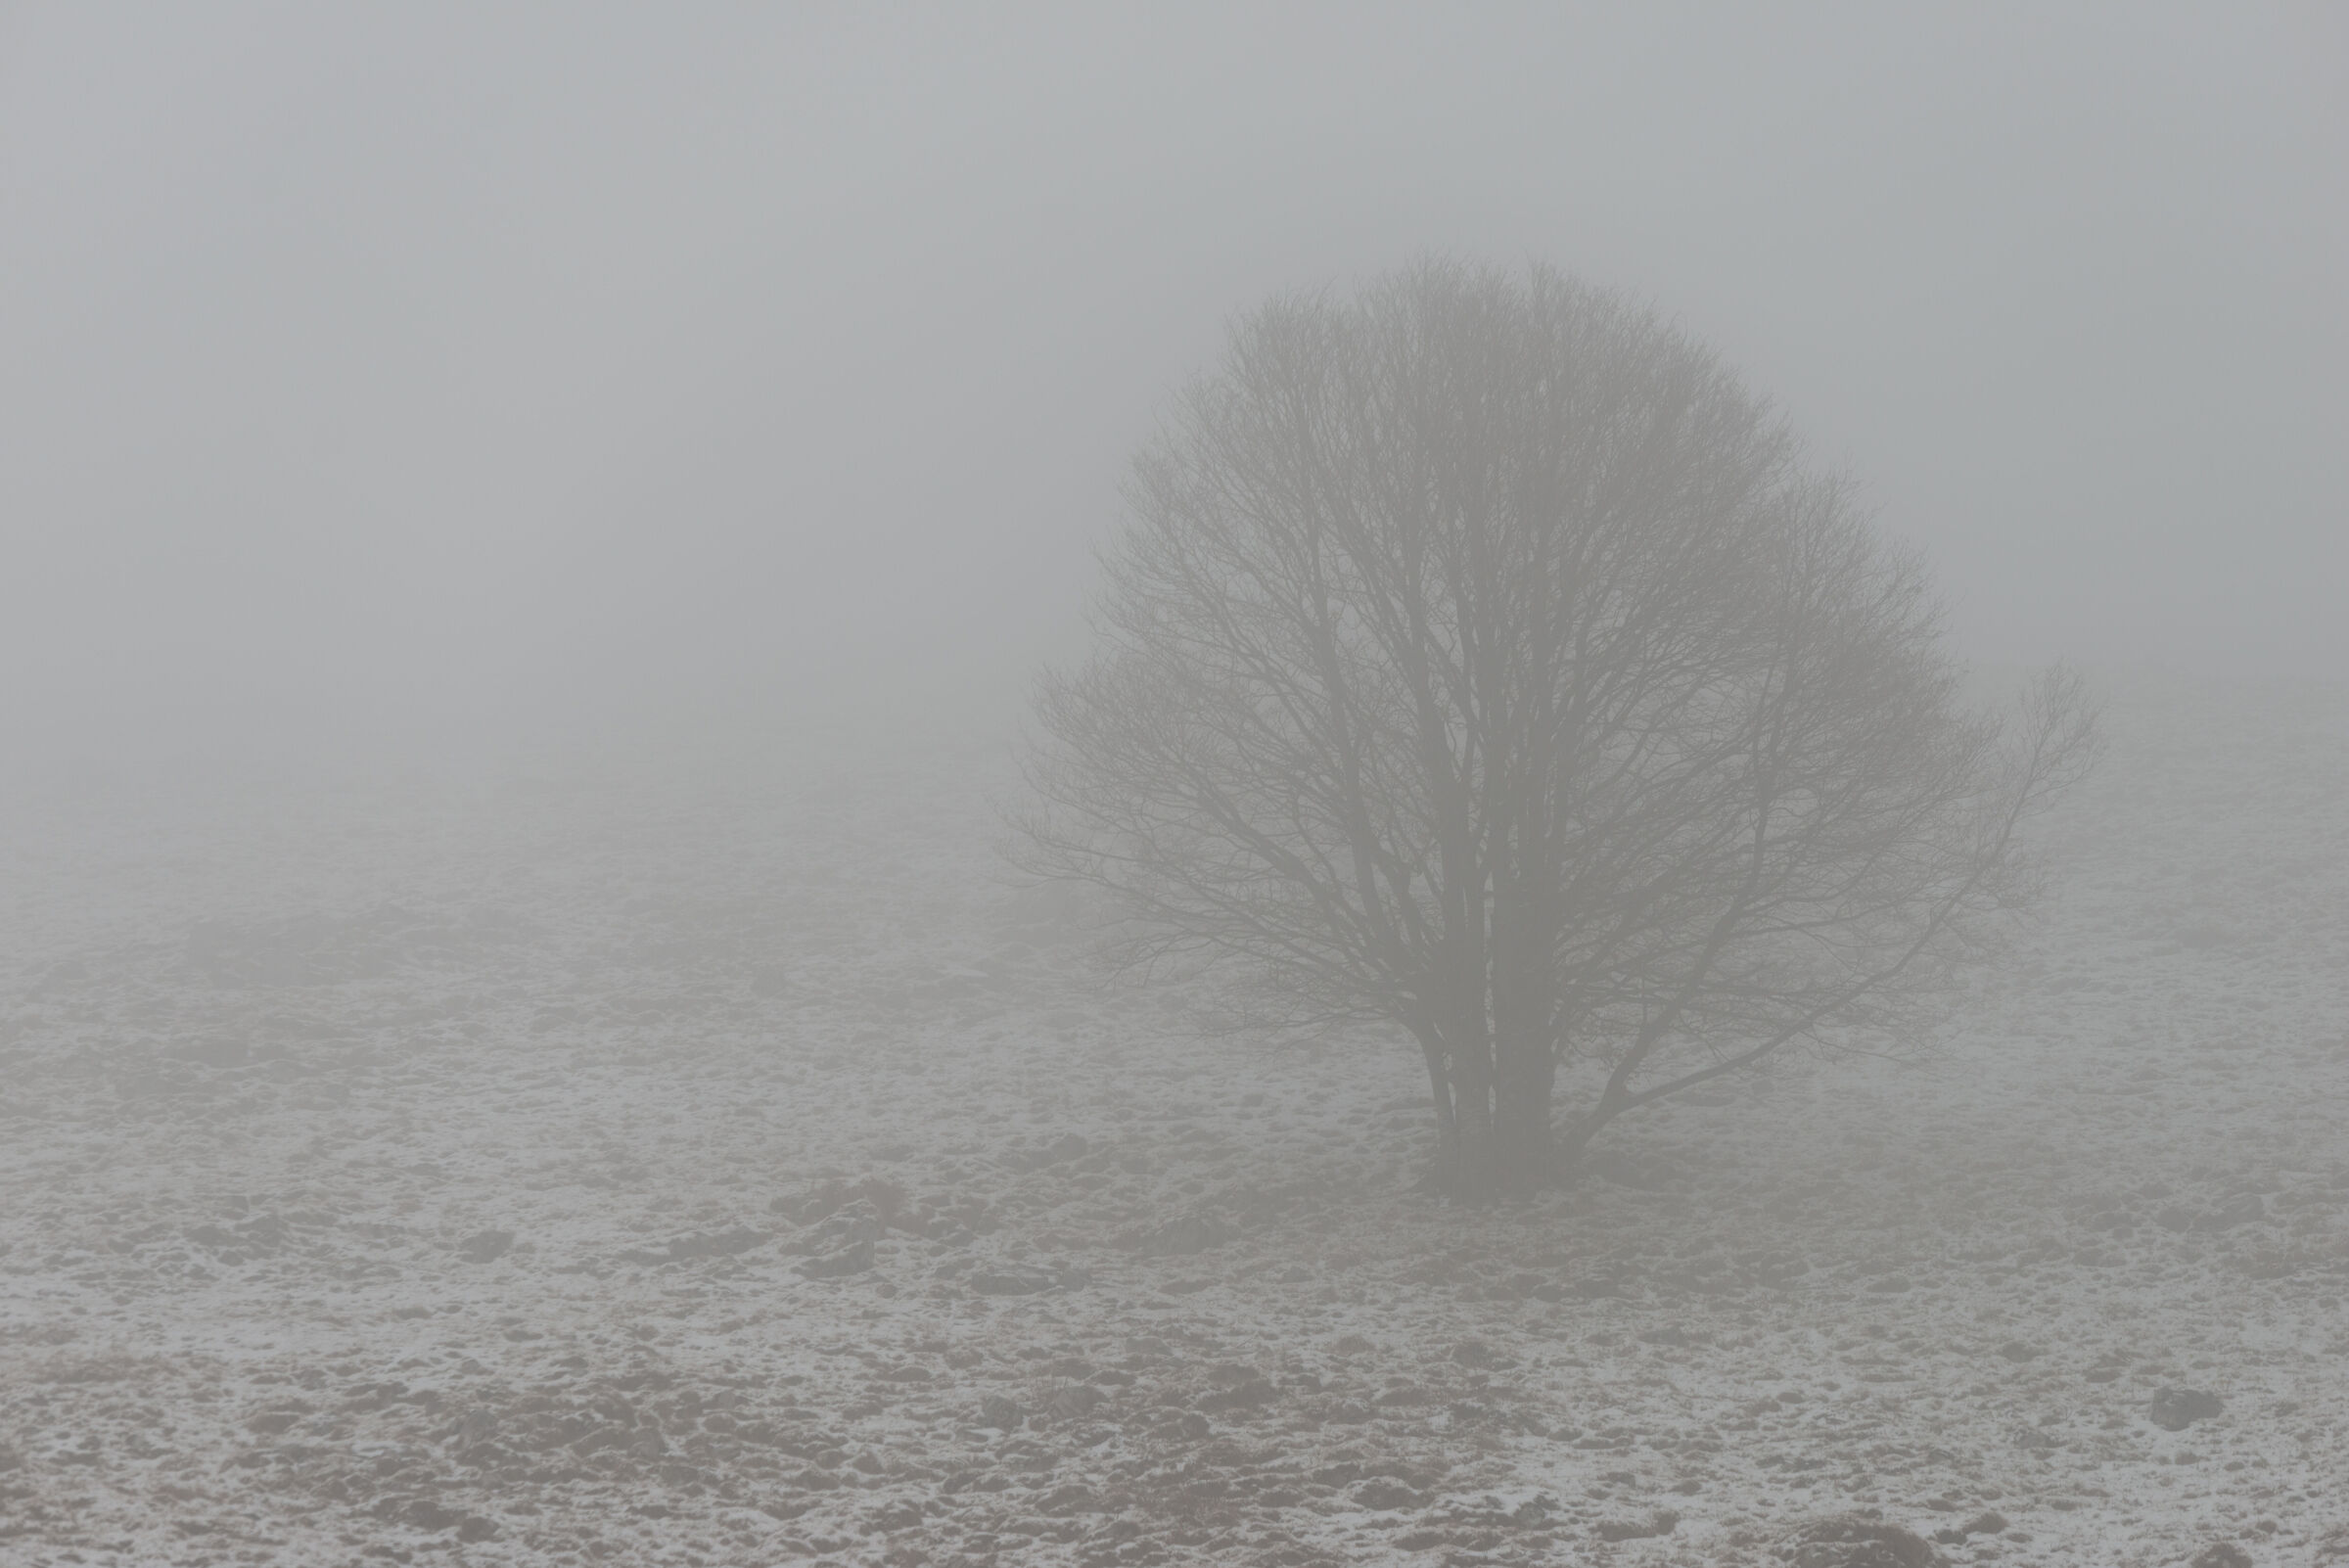 Tree in snowy and foggy landscape...